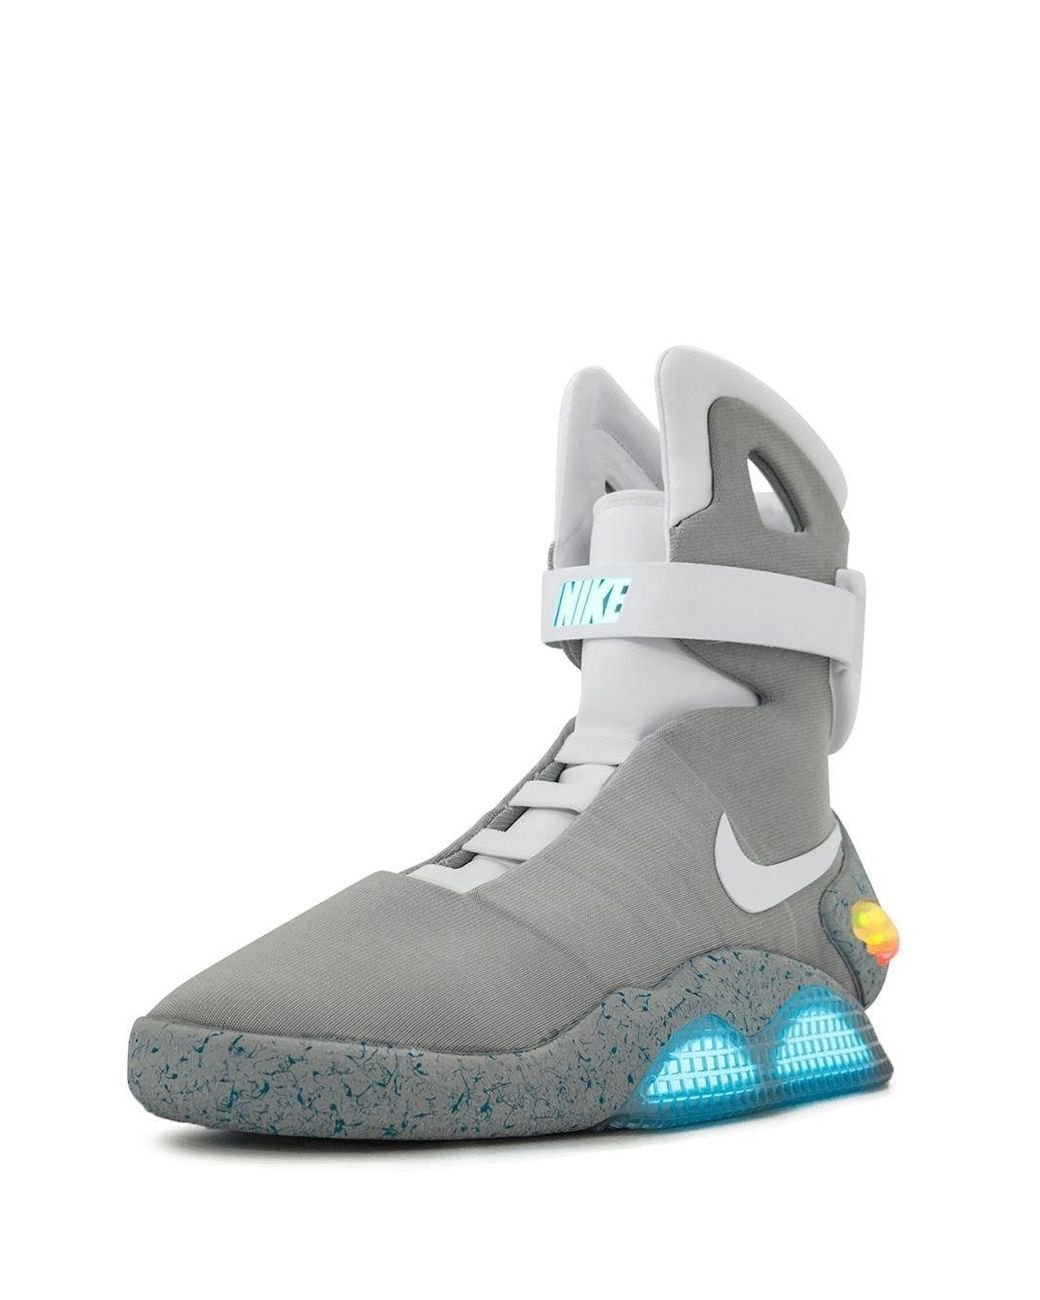 what was the retail price for the nike air mags